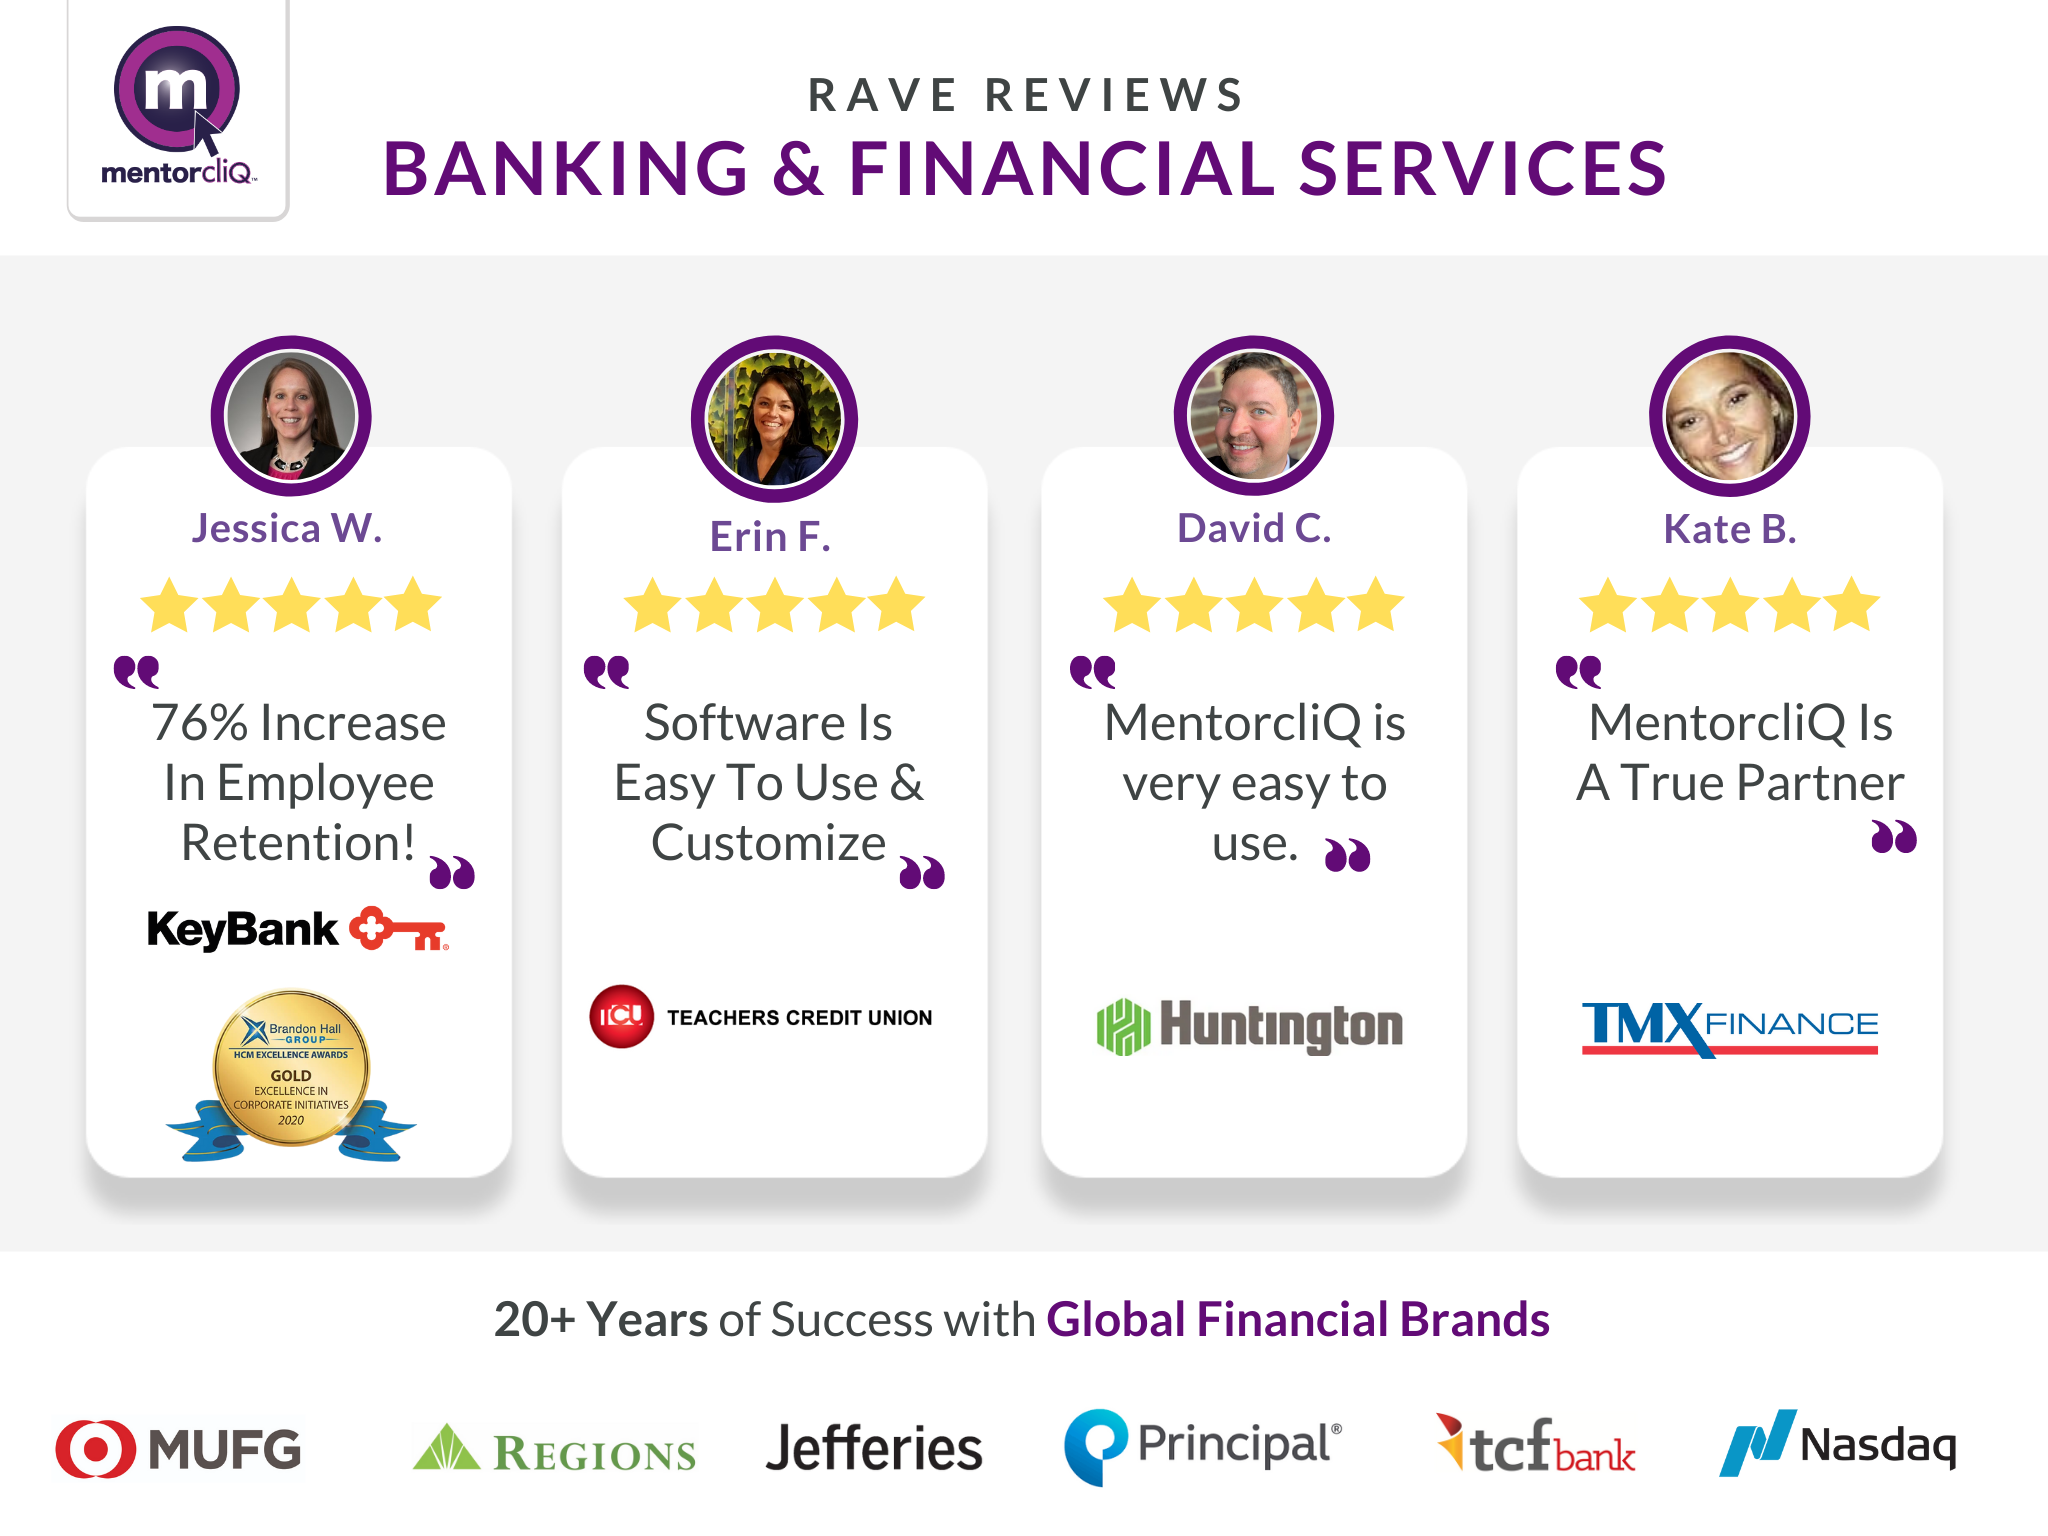 MentorcliQ Software - MentorcliQ has 20+ years of success with global financial brands. Read some of the company reviews from financial services organizations who trust MentorcliQ with their talent engagement strategy.